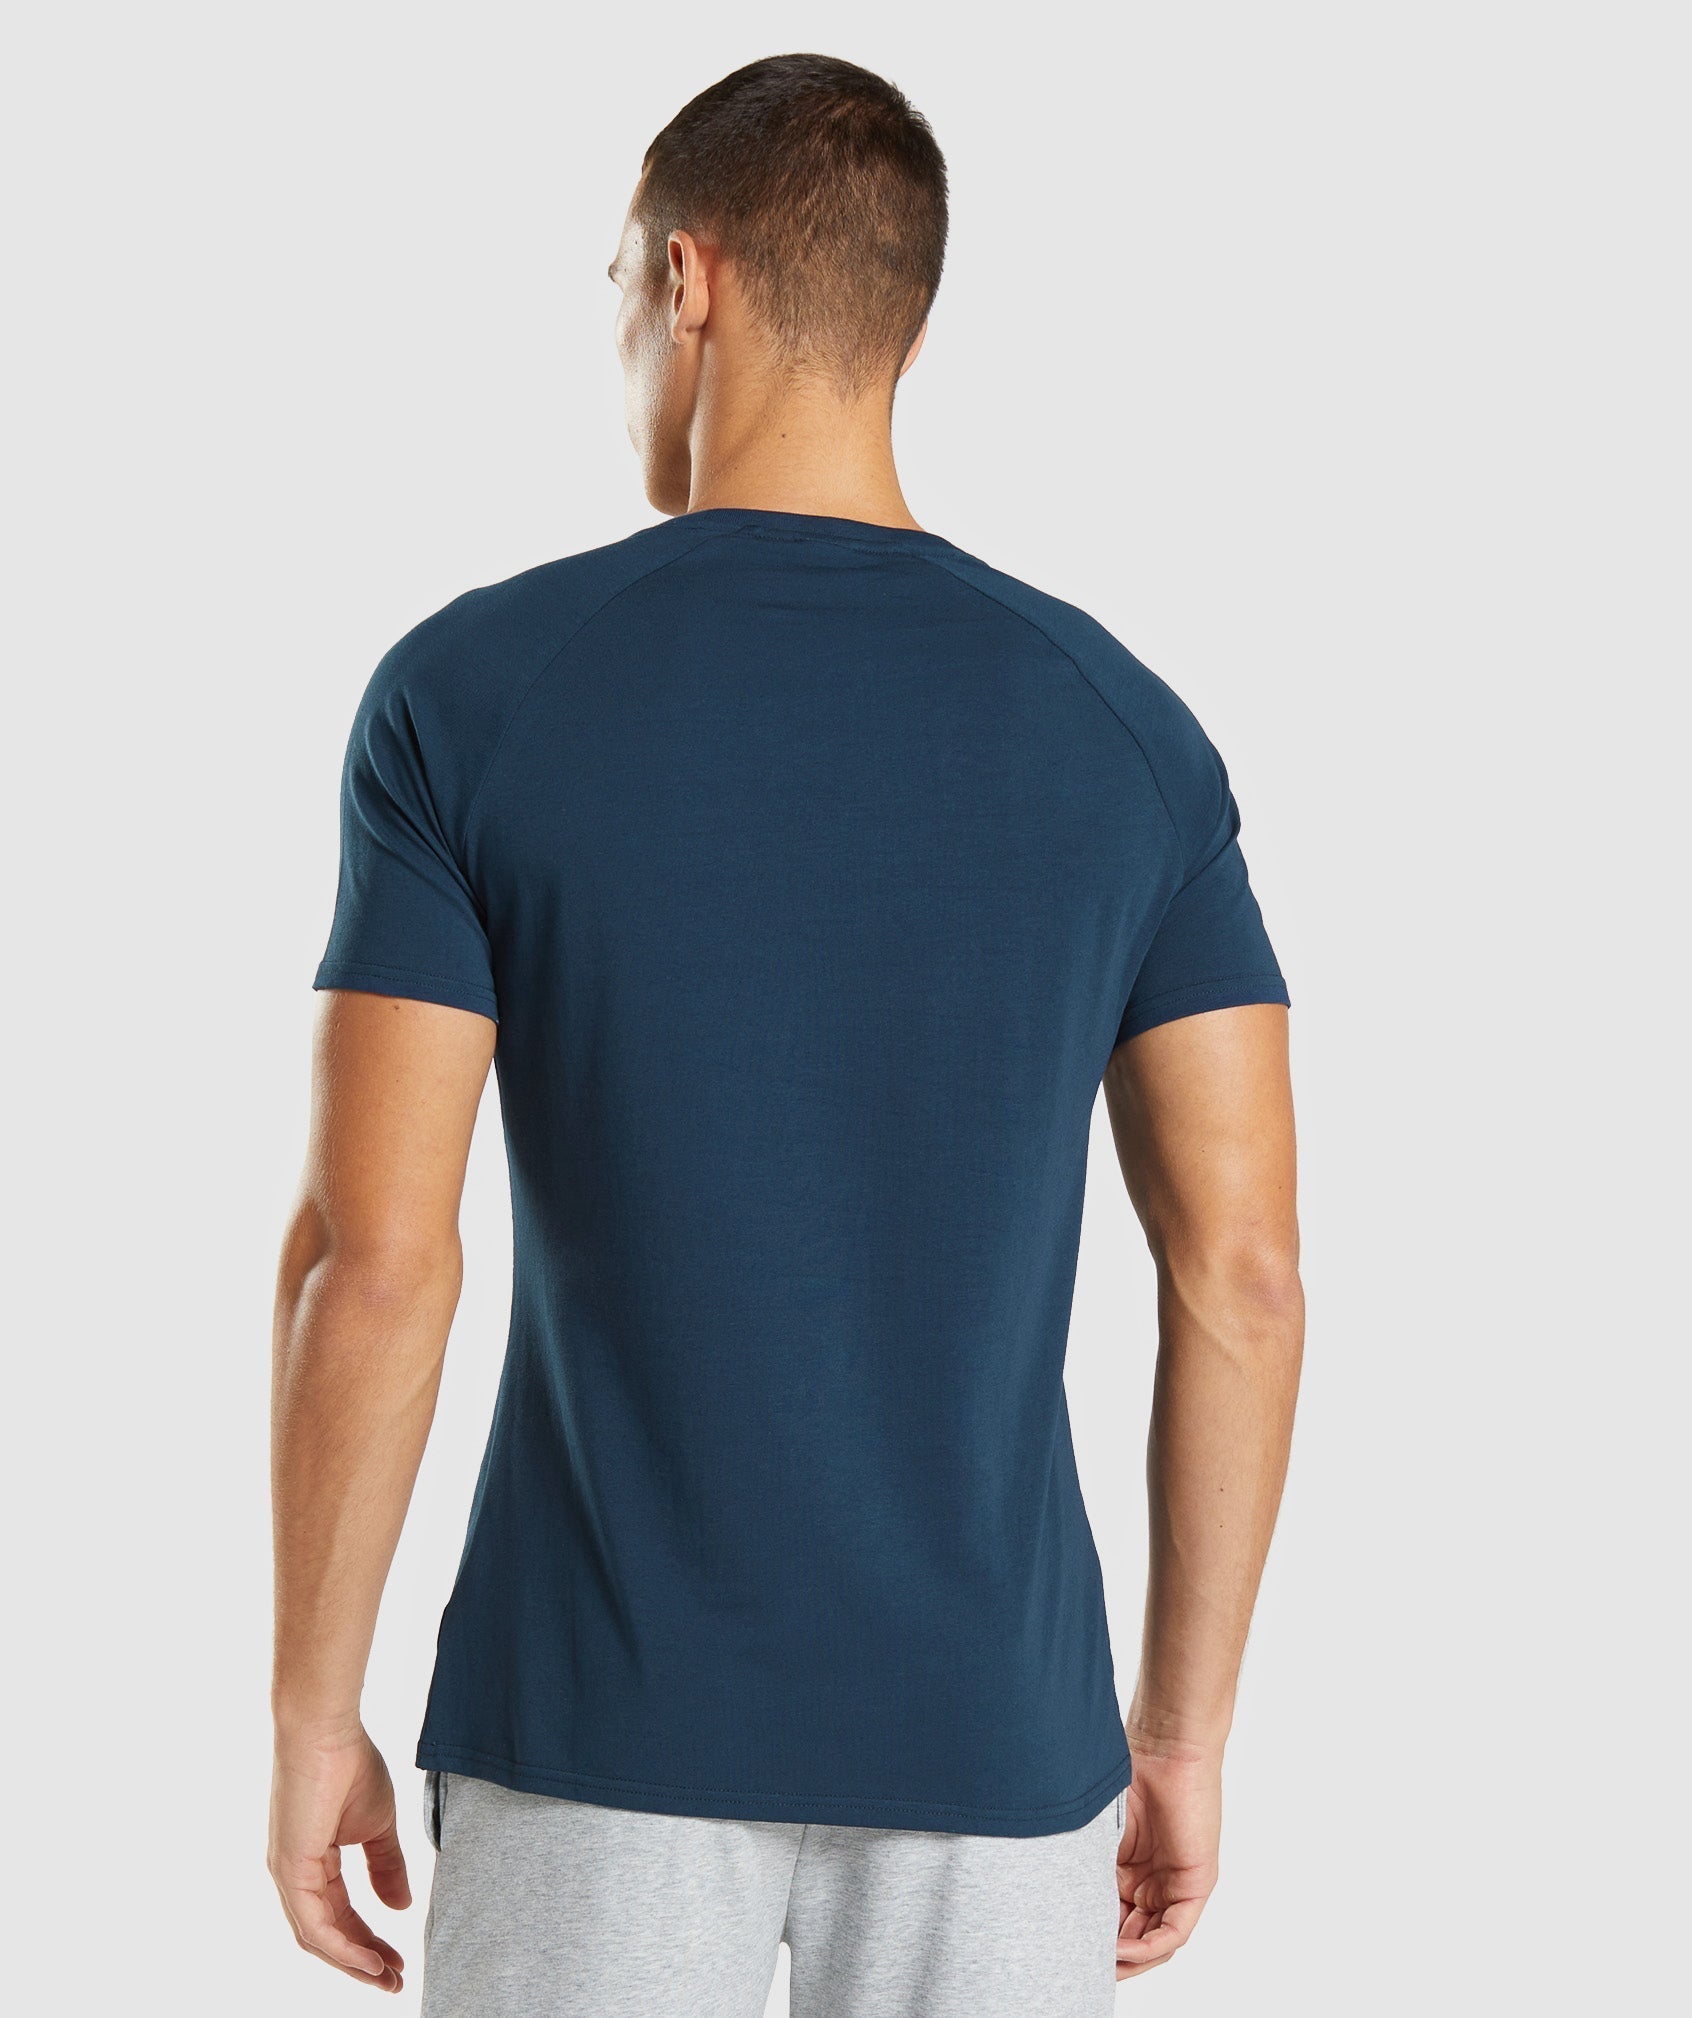 Apollo T-Shirt in Navy - view 3